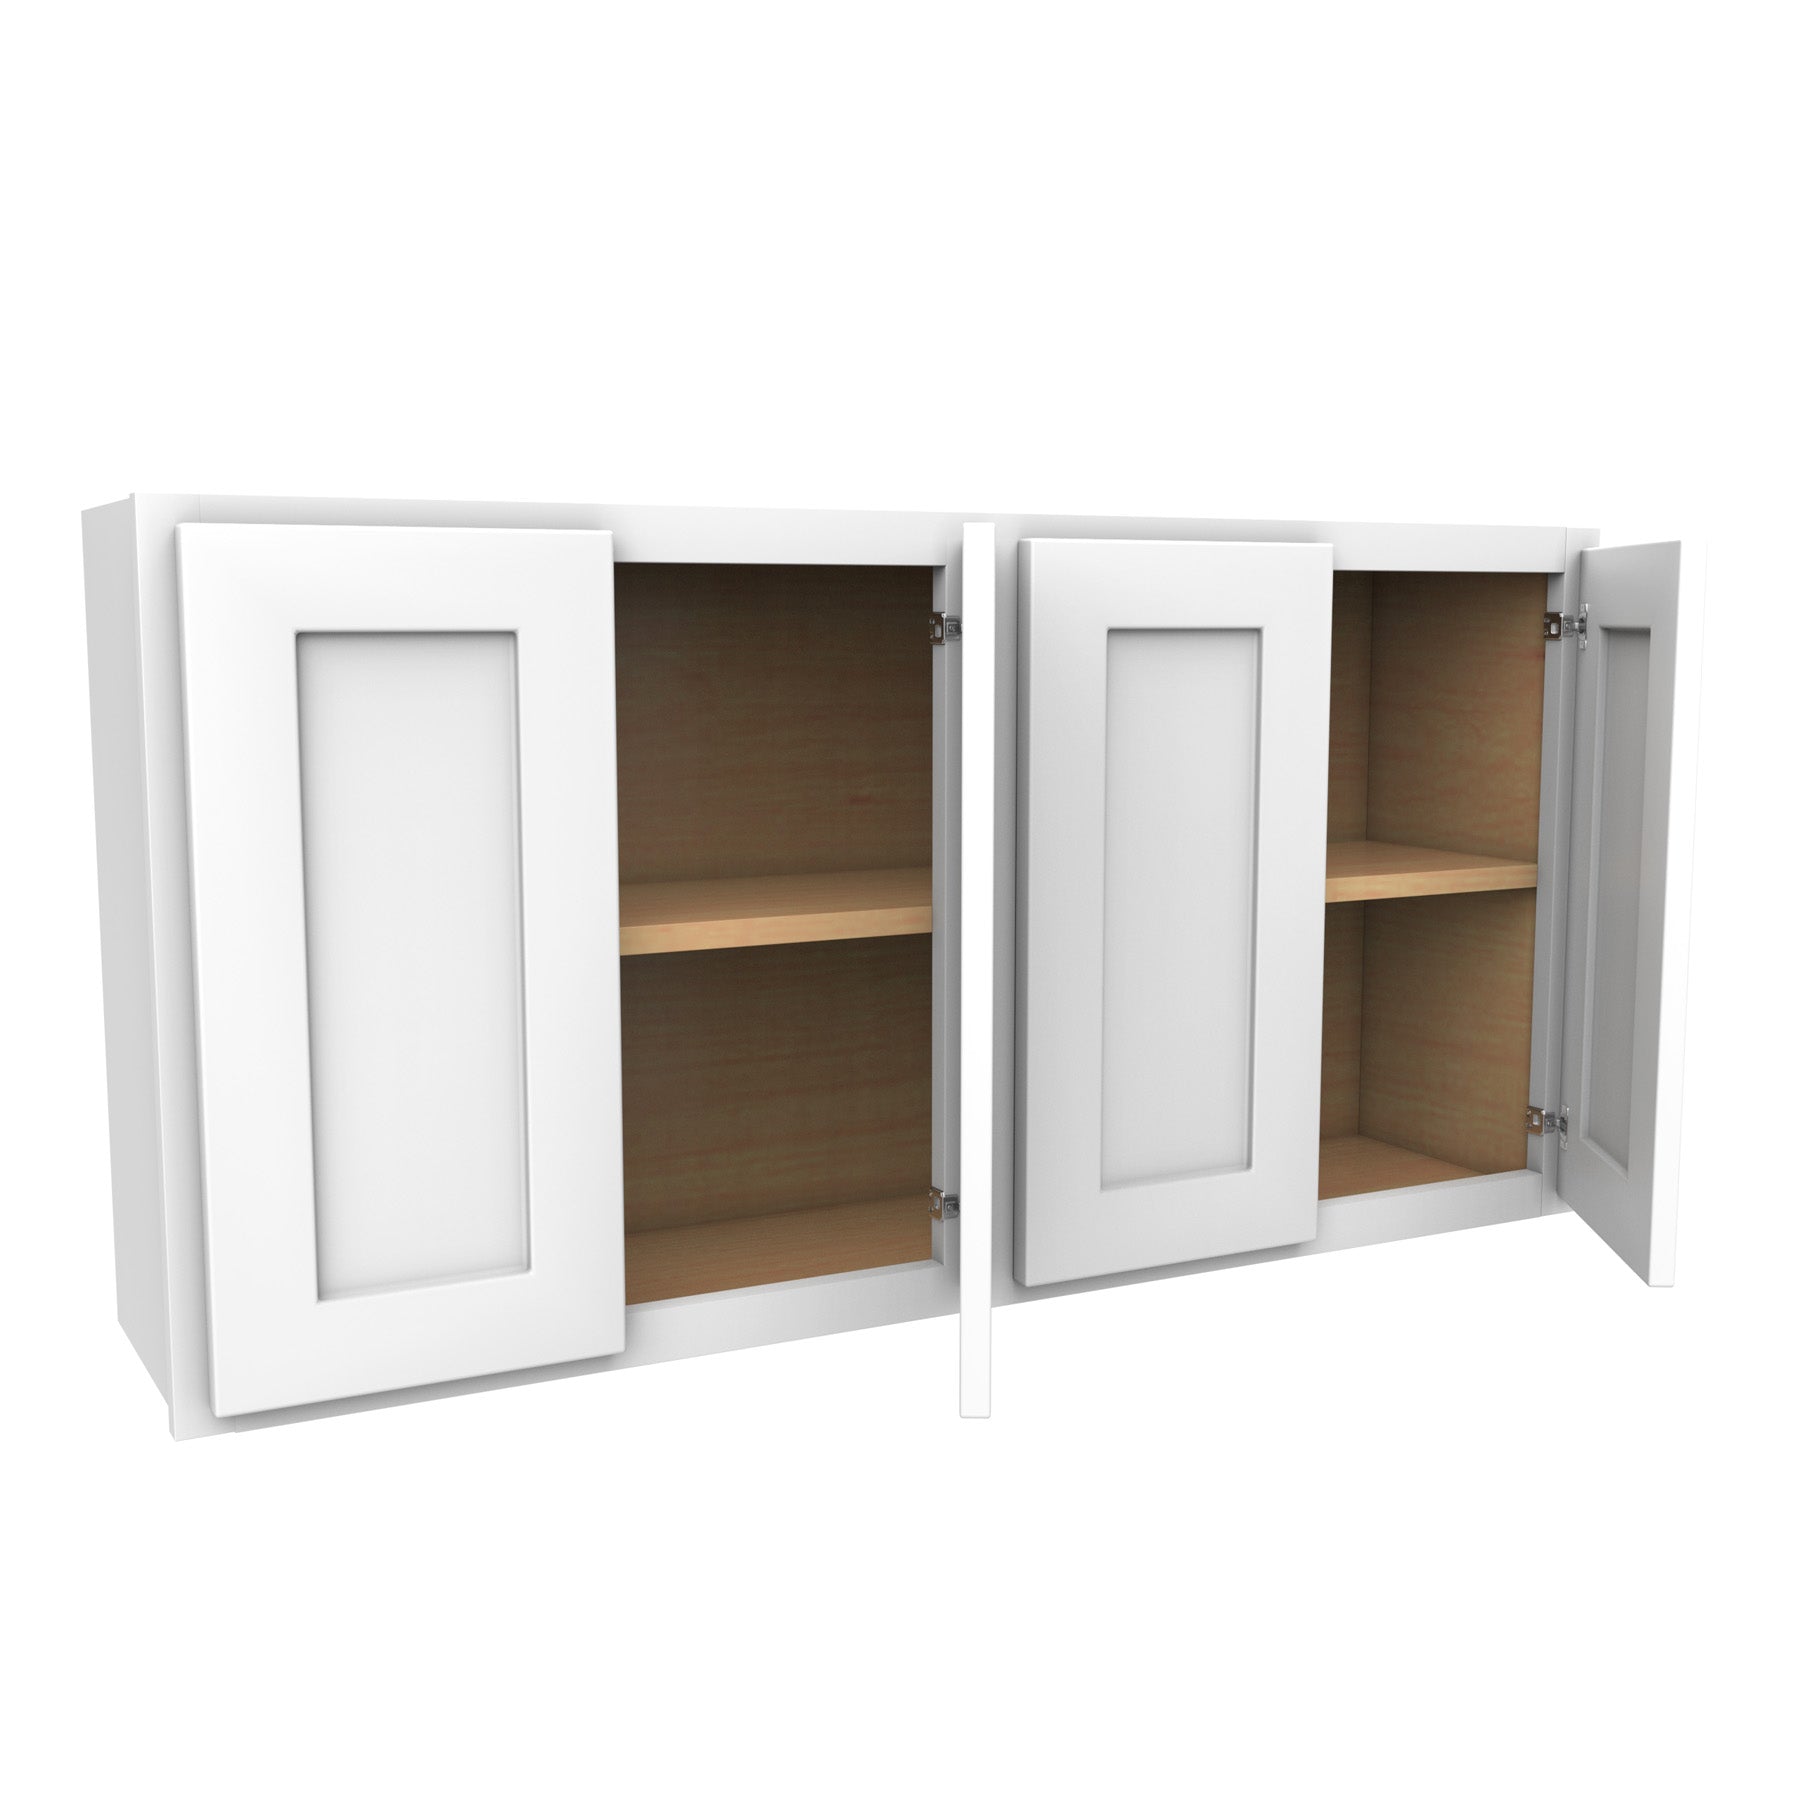 Luxor White - 48"W x 24"H x 12"D | Wall Cabinet